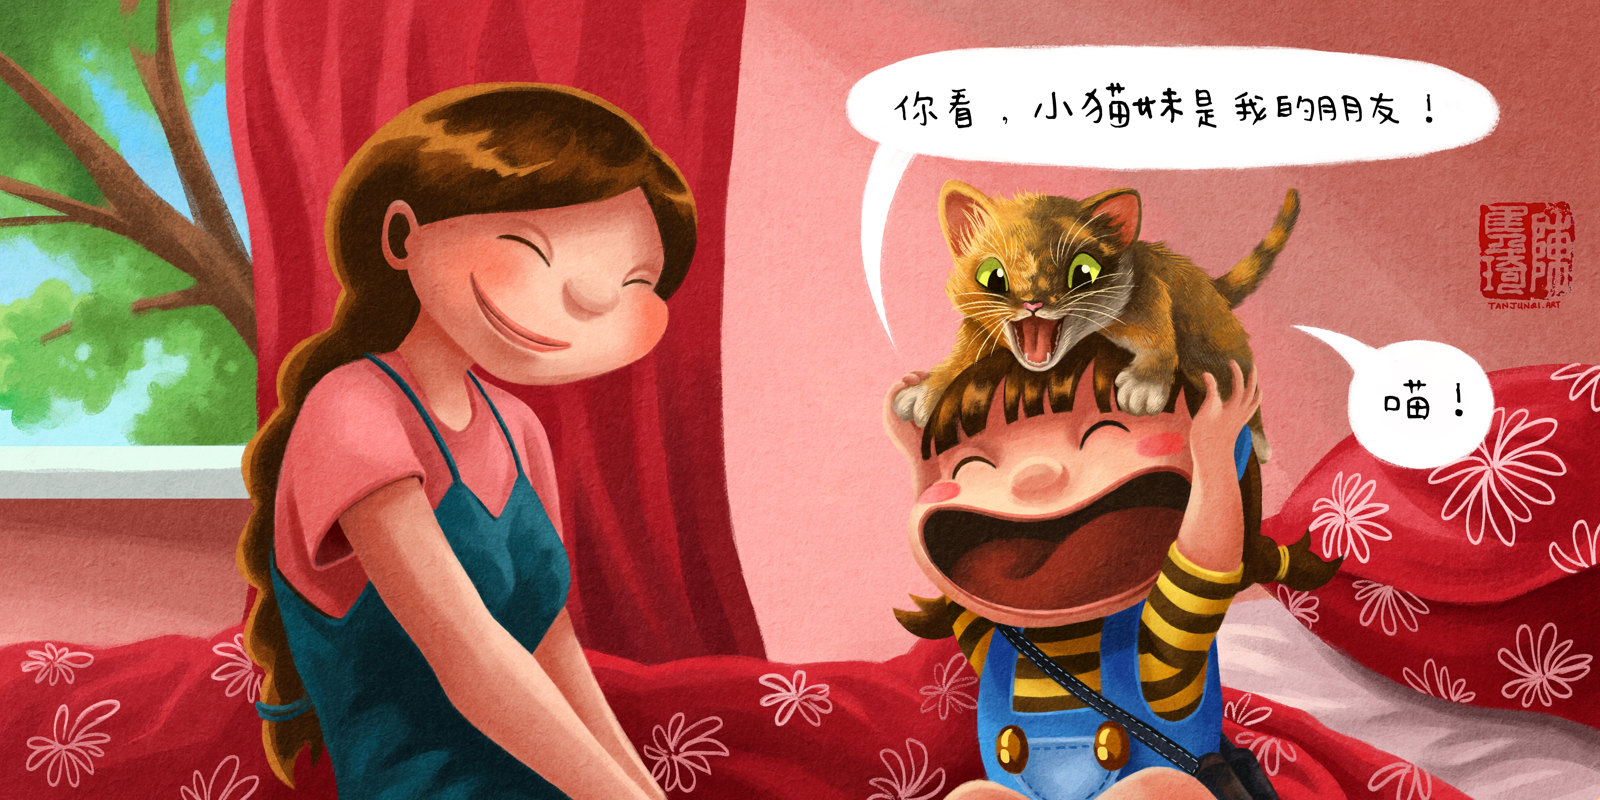 A two-page spread from 'Shan Shan Has No Friends?' (chinese version), showing Shan Shan playing with Little Sister Kitty, who is sitting a top her head, and telling mom that Little Sister Kitty is her friend.